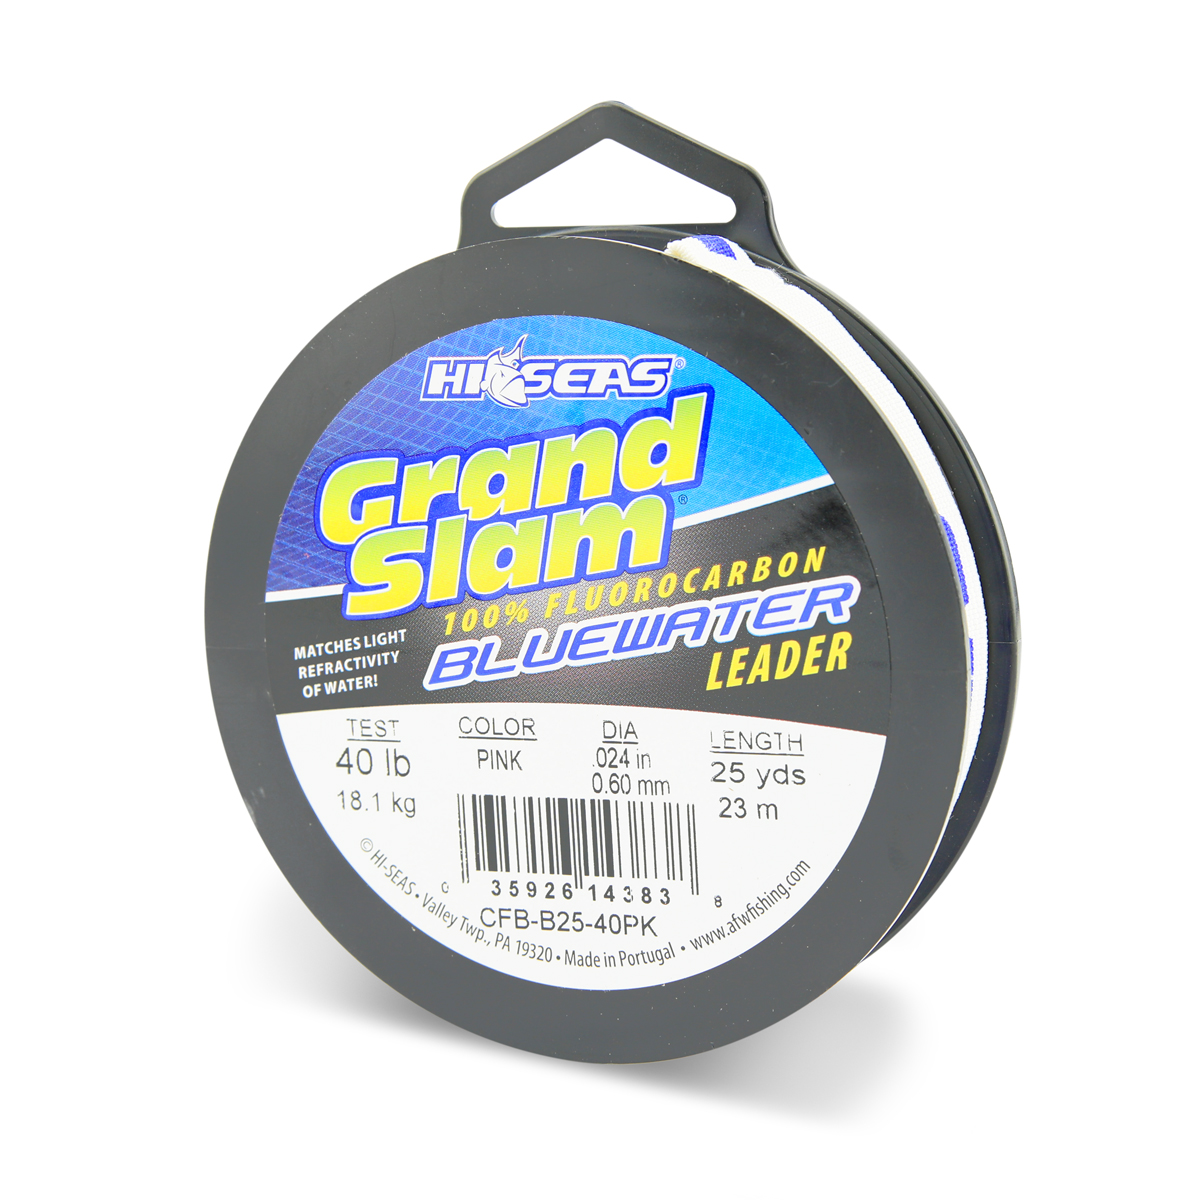 Grand Slam Bluewater 100% Fluorocarbon Leader, 40 lb / 18.1 kg test, .024  in / 0.60 mm dia, Pink, 25 yd / 23 m Spool